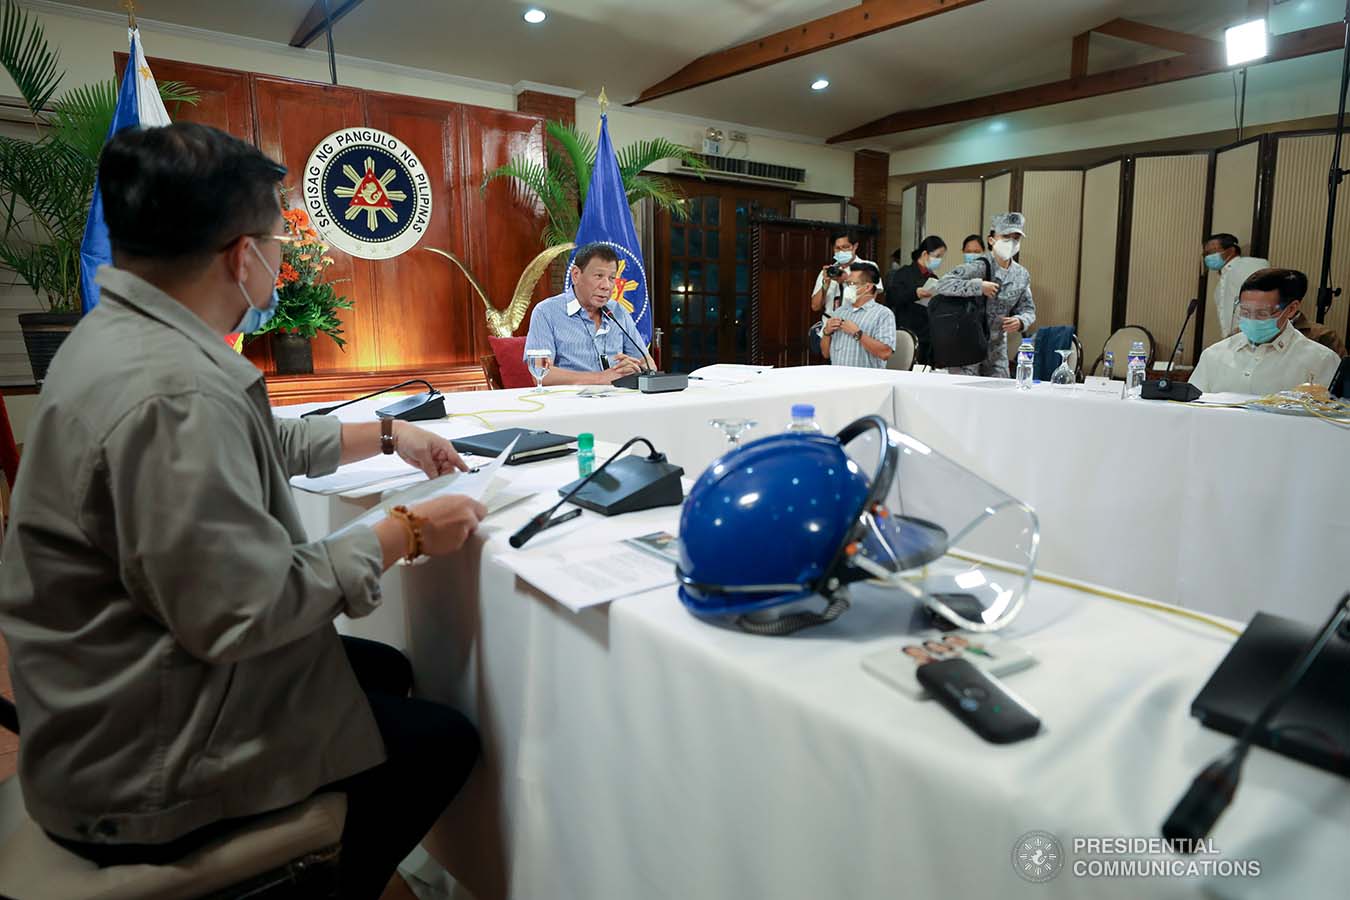 President Rodrigo Roa Duterte talks to the people after holding a meeting with the Inter-Agency Task Force on the Emerging Infectious Diseases (IATF-EID) core members at the Malago Clubhouse in Malacañang on July 15, 2020. SIMEON CELI JR./PRESIDENTIAL PHOTO